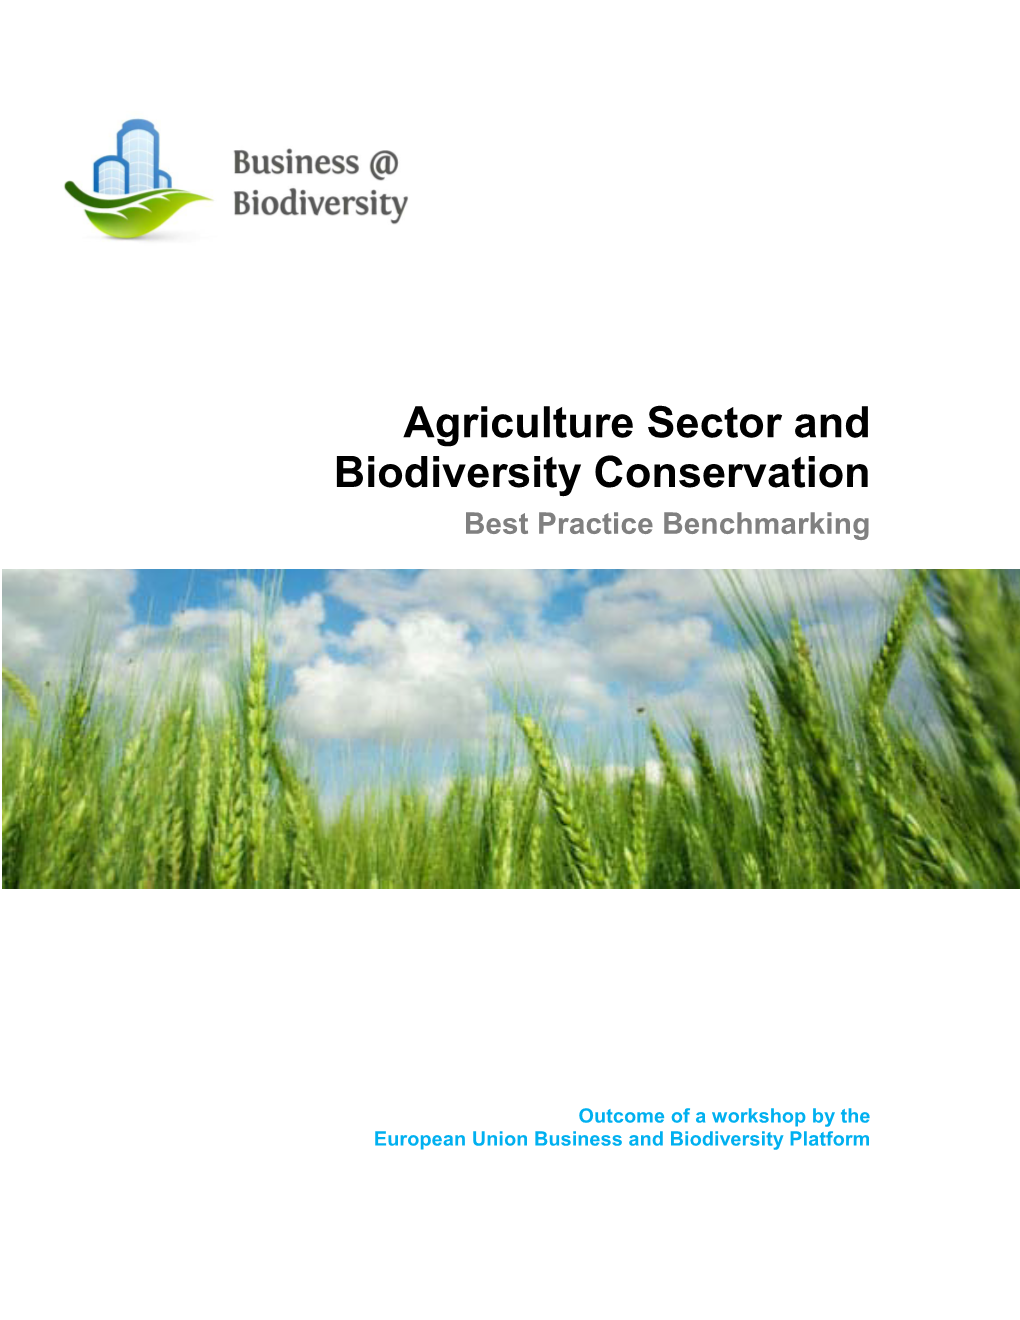 Agriculture Sector and Biodiversity Conservation Best Practice Benchmarking